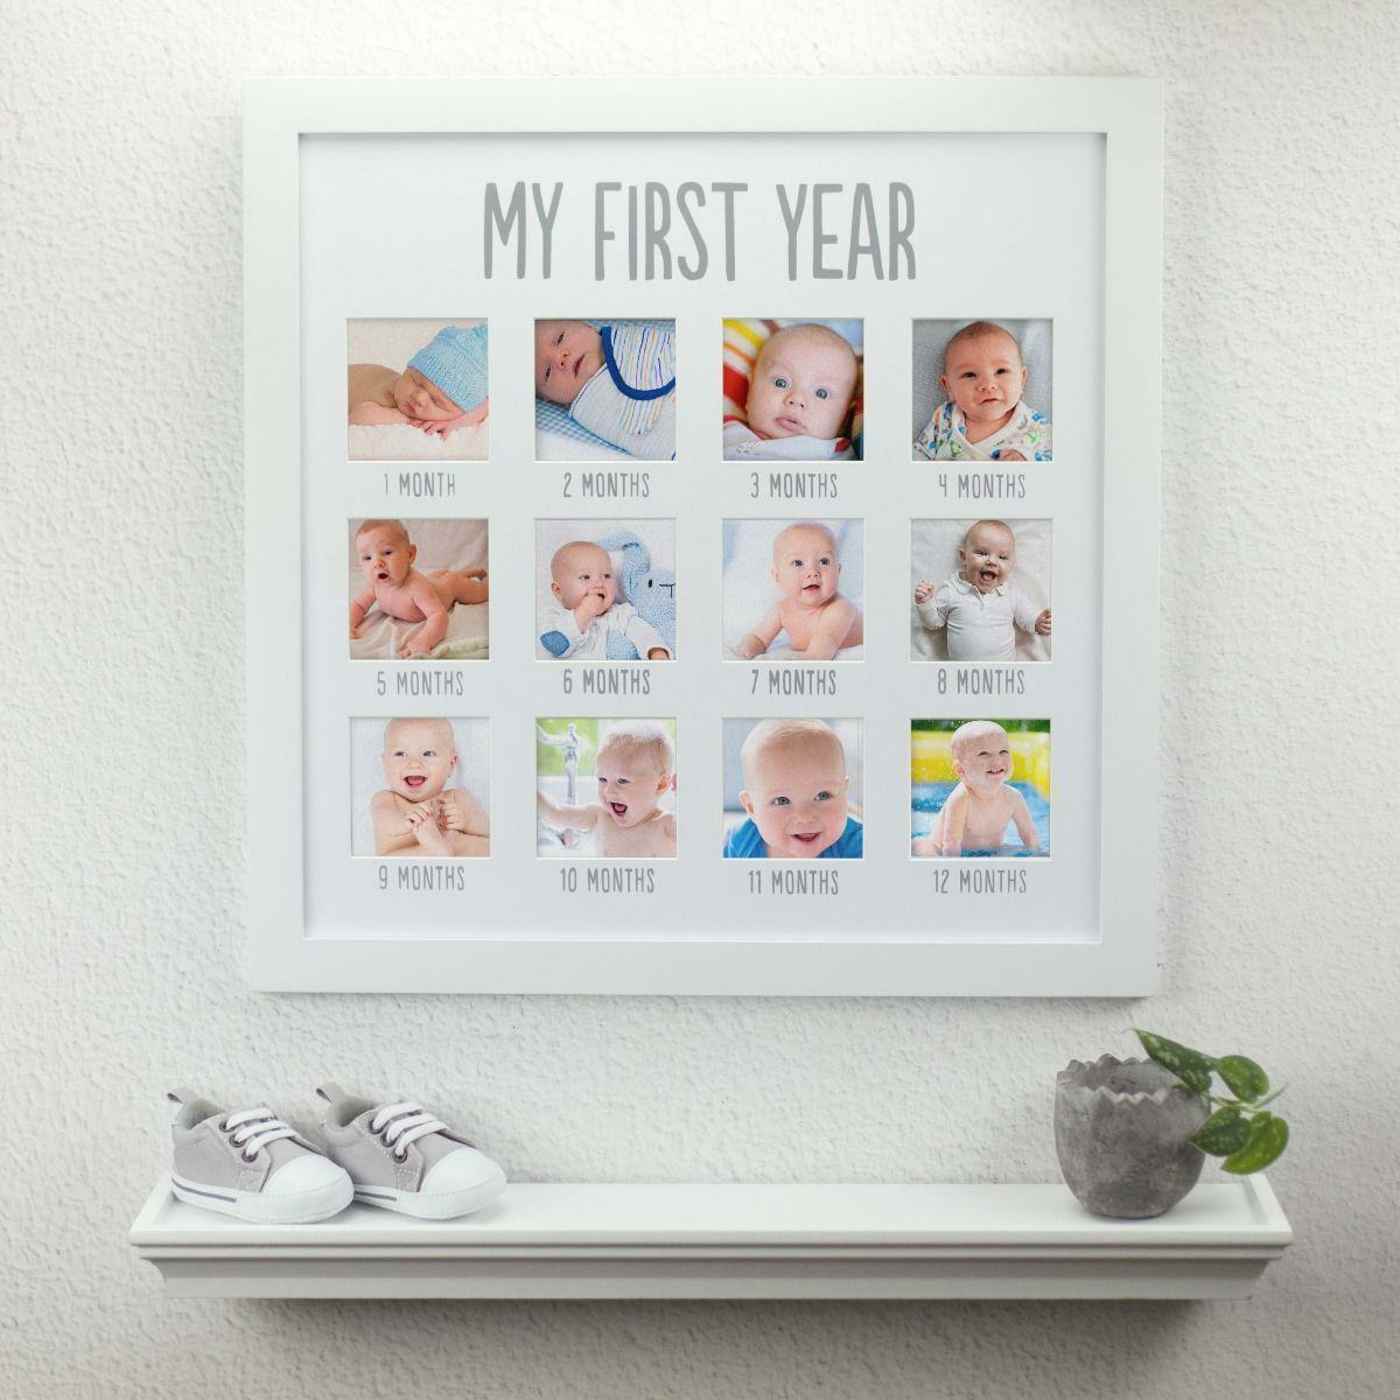 Gift idea for the parents with photos from every month of the first year of life in a special frame